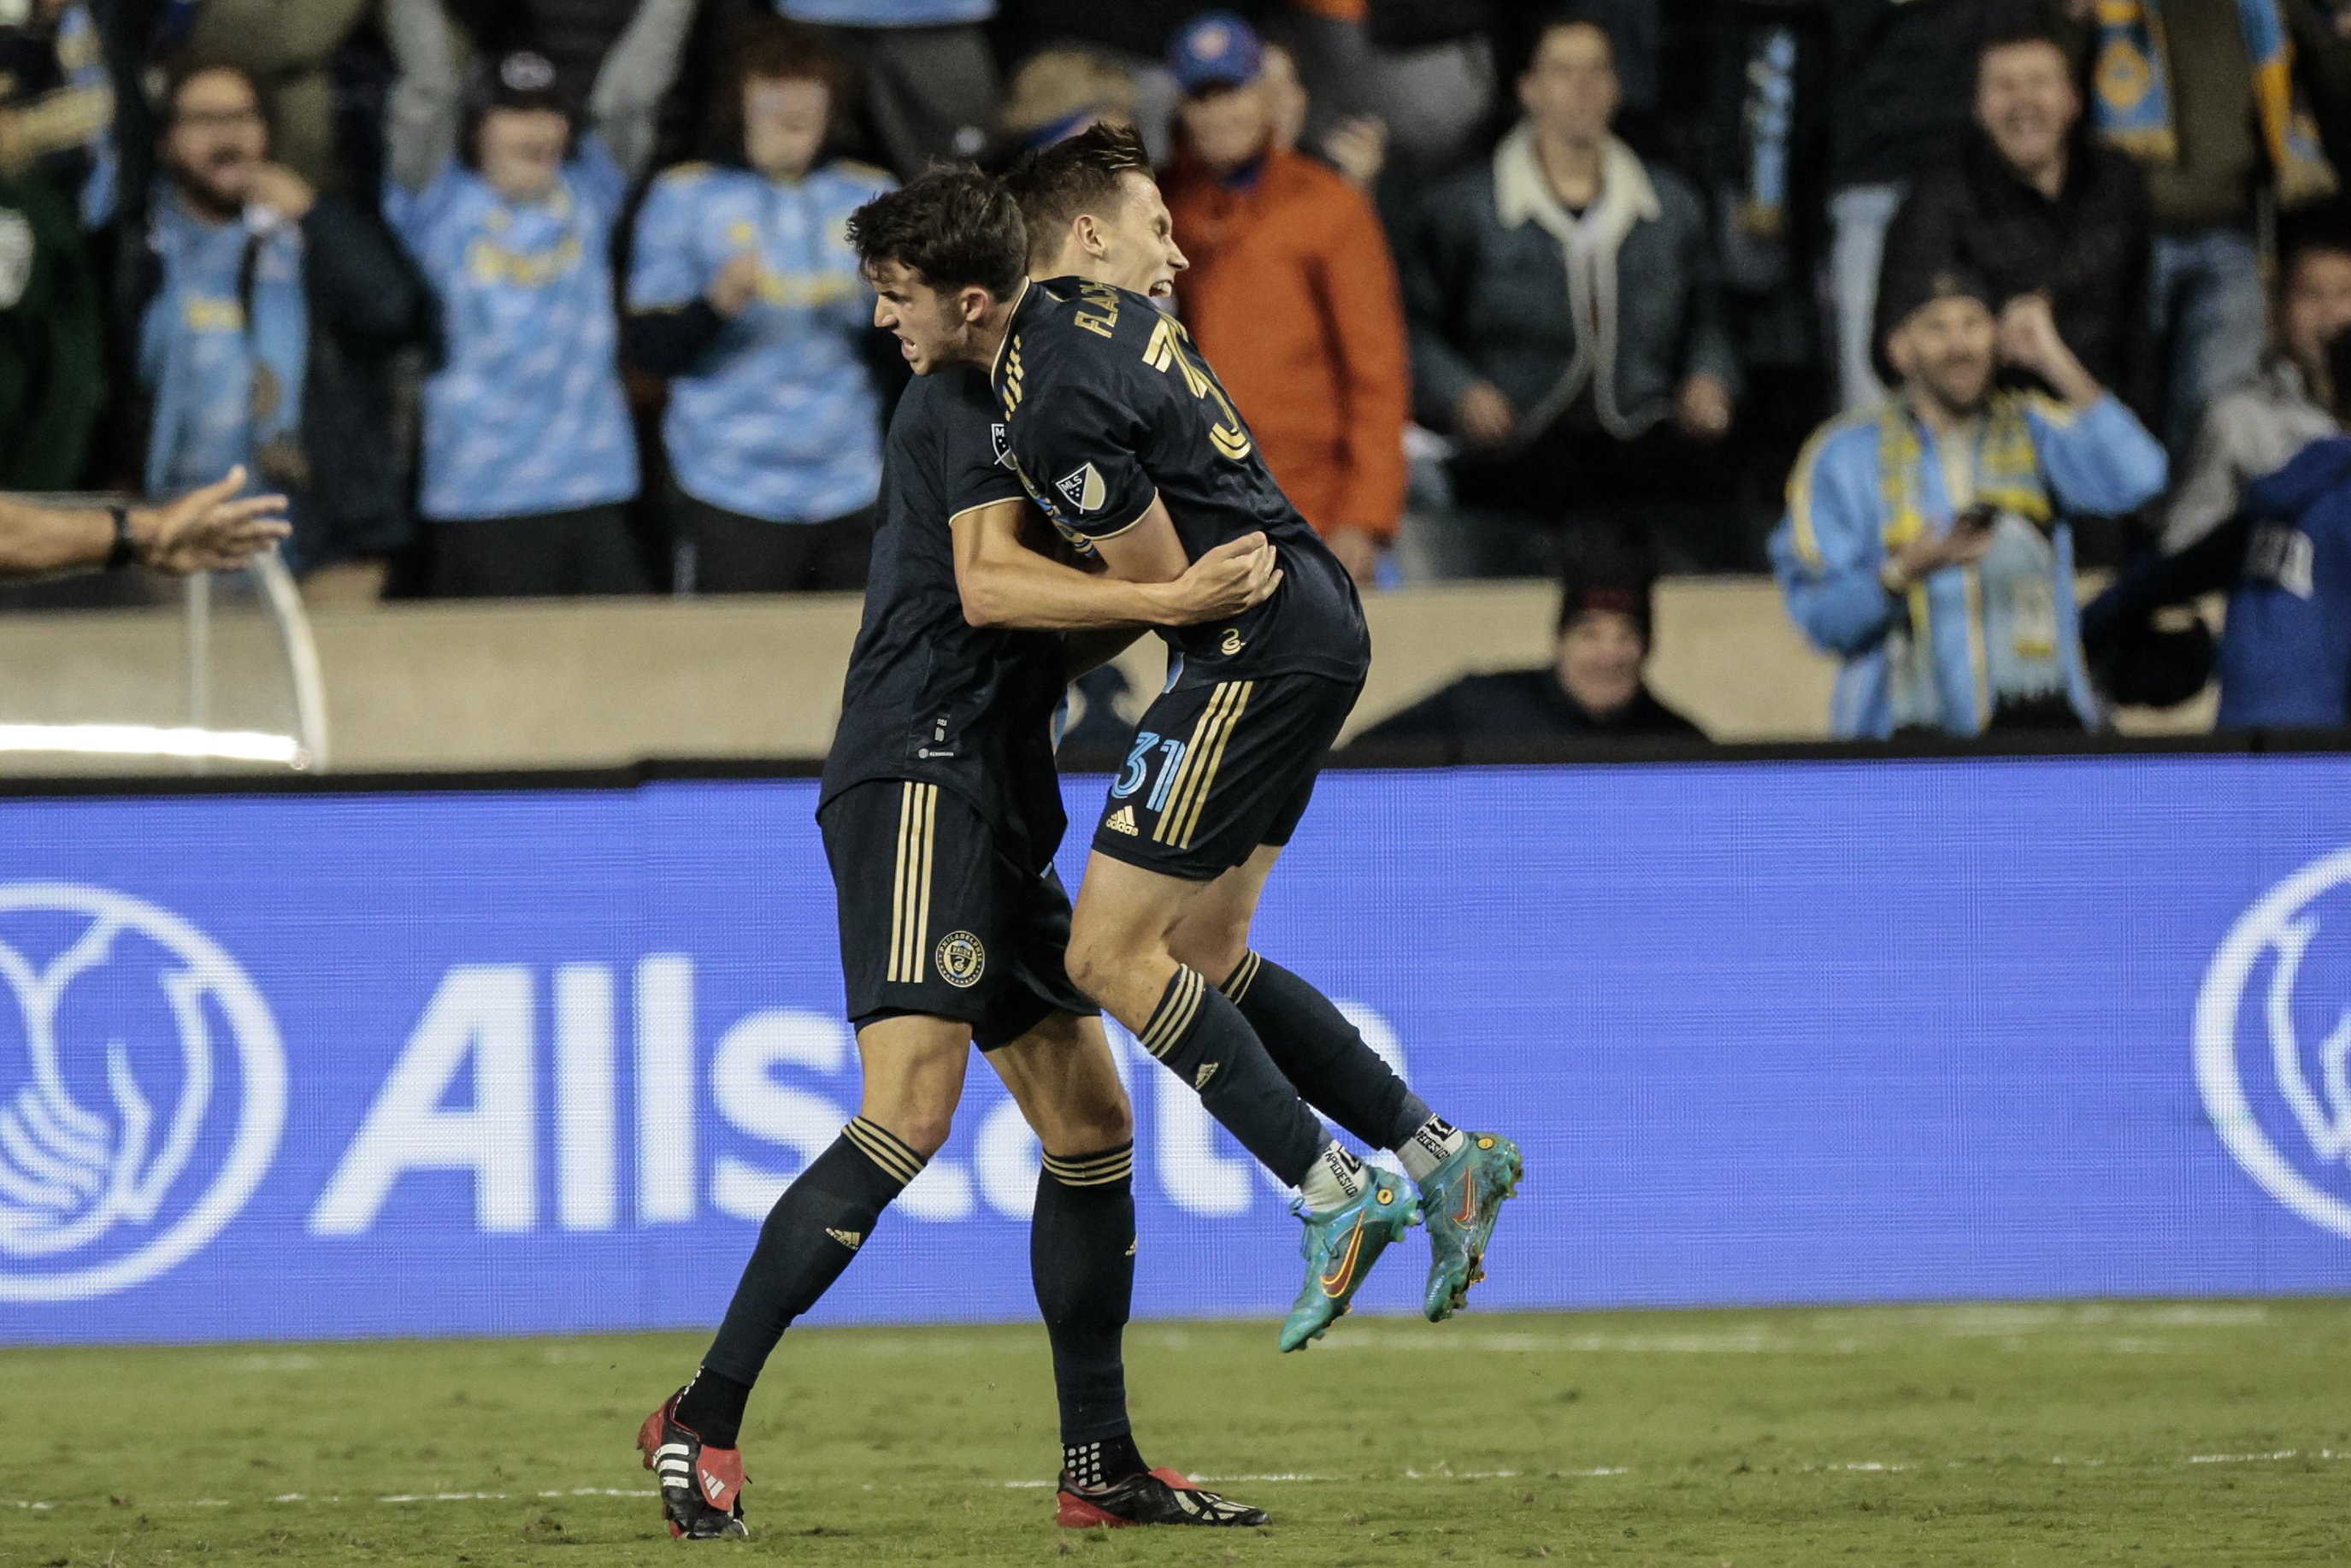 Kick Off Spring with a Day Trip to a Philadelphia Union Soccer